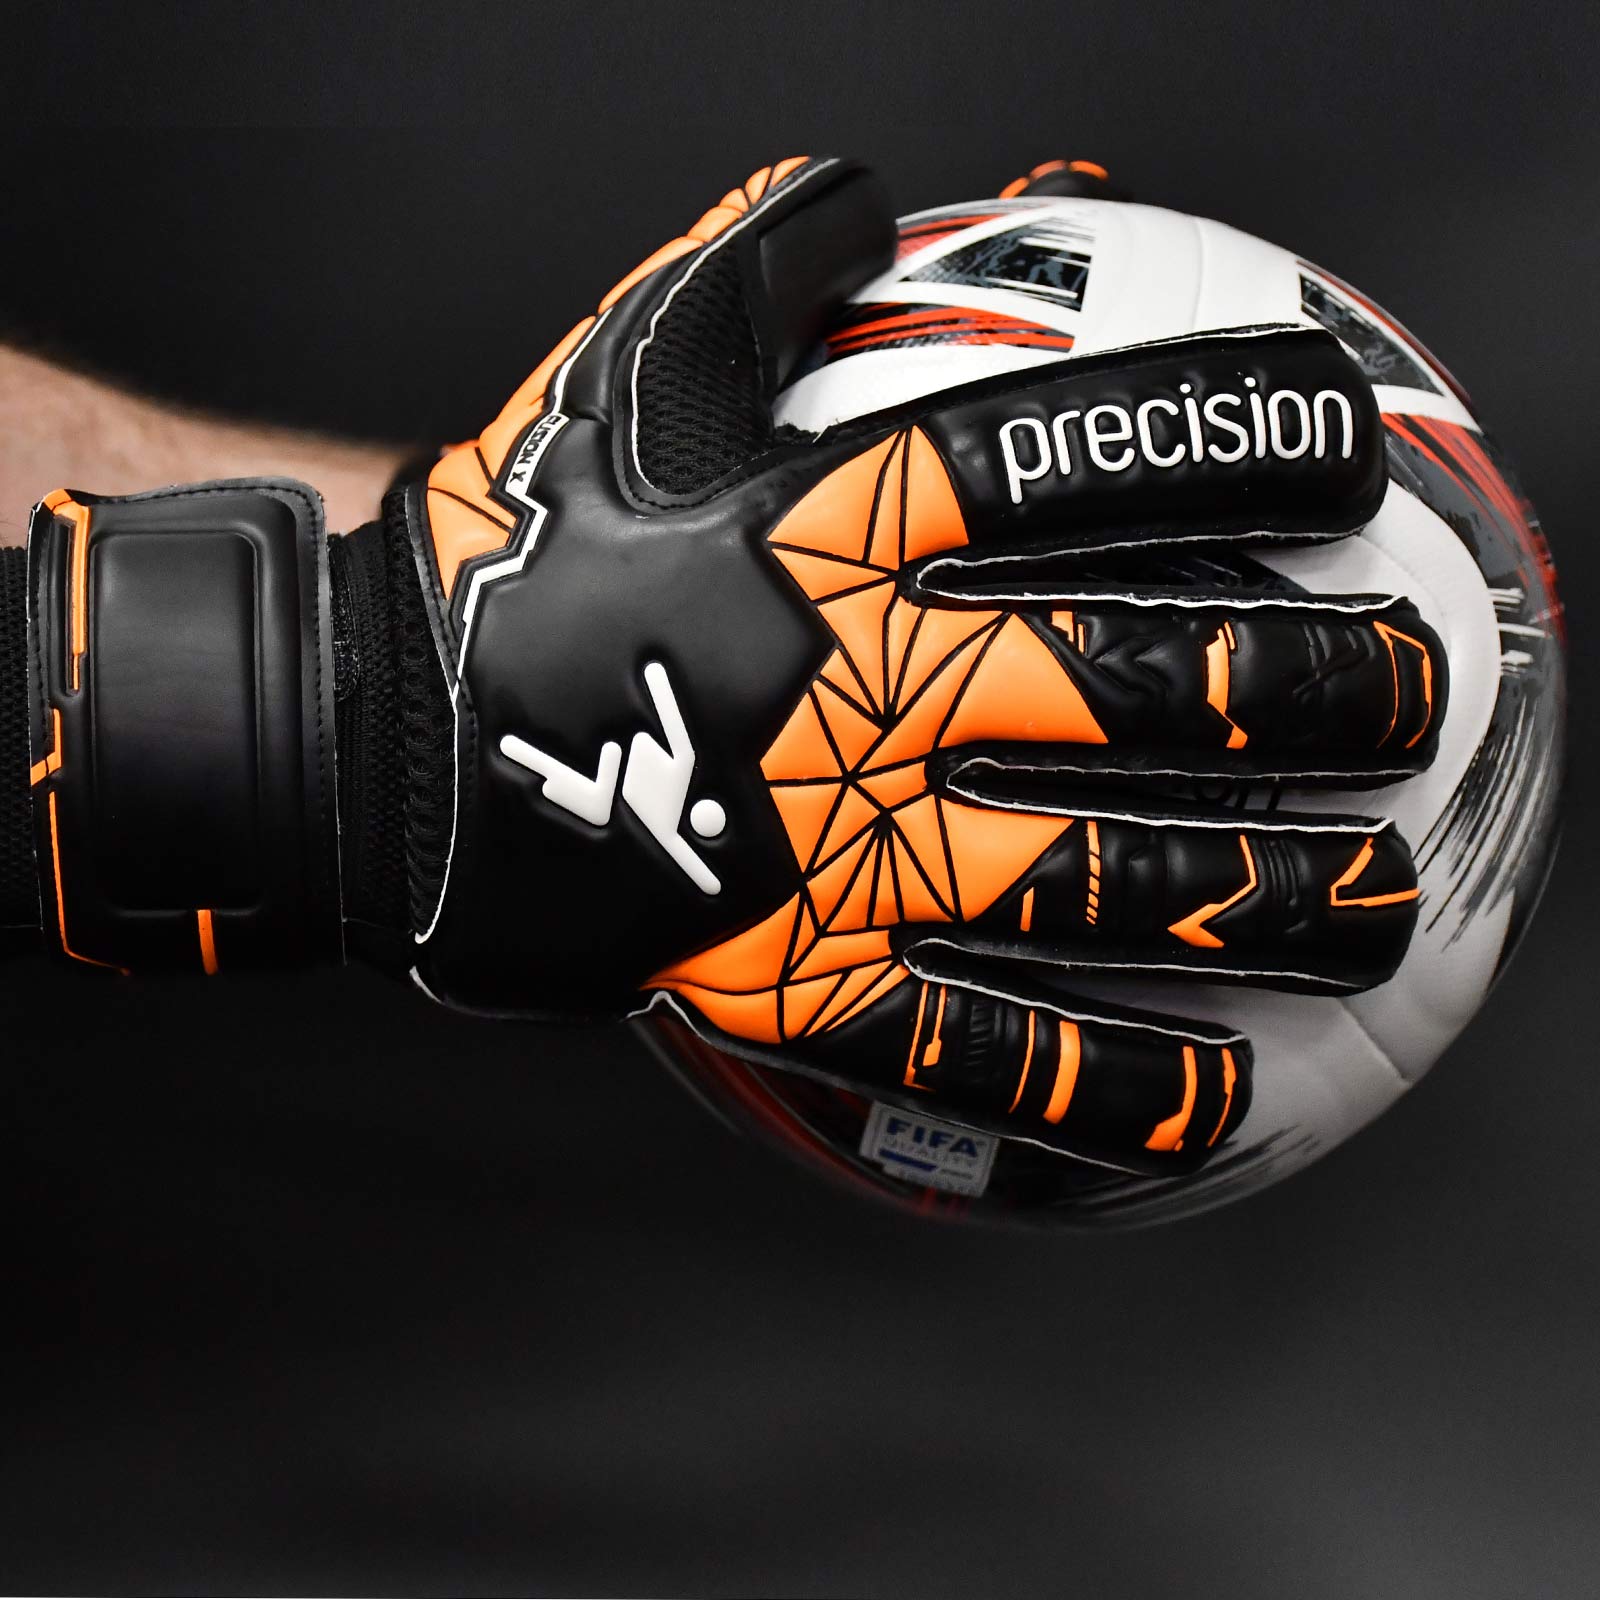 PRECISION FUSION X ROLL FINGER PROTECT GOALKEEPER GLOVES